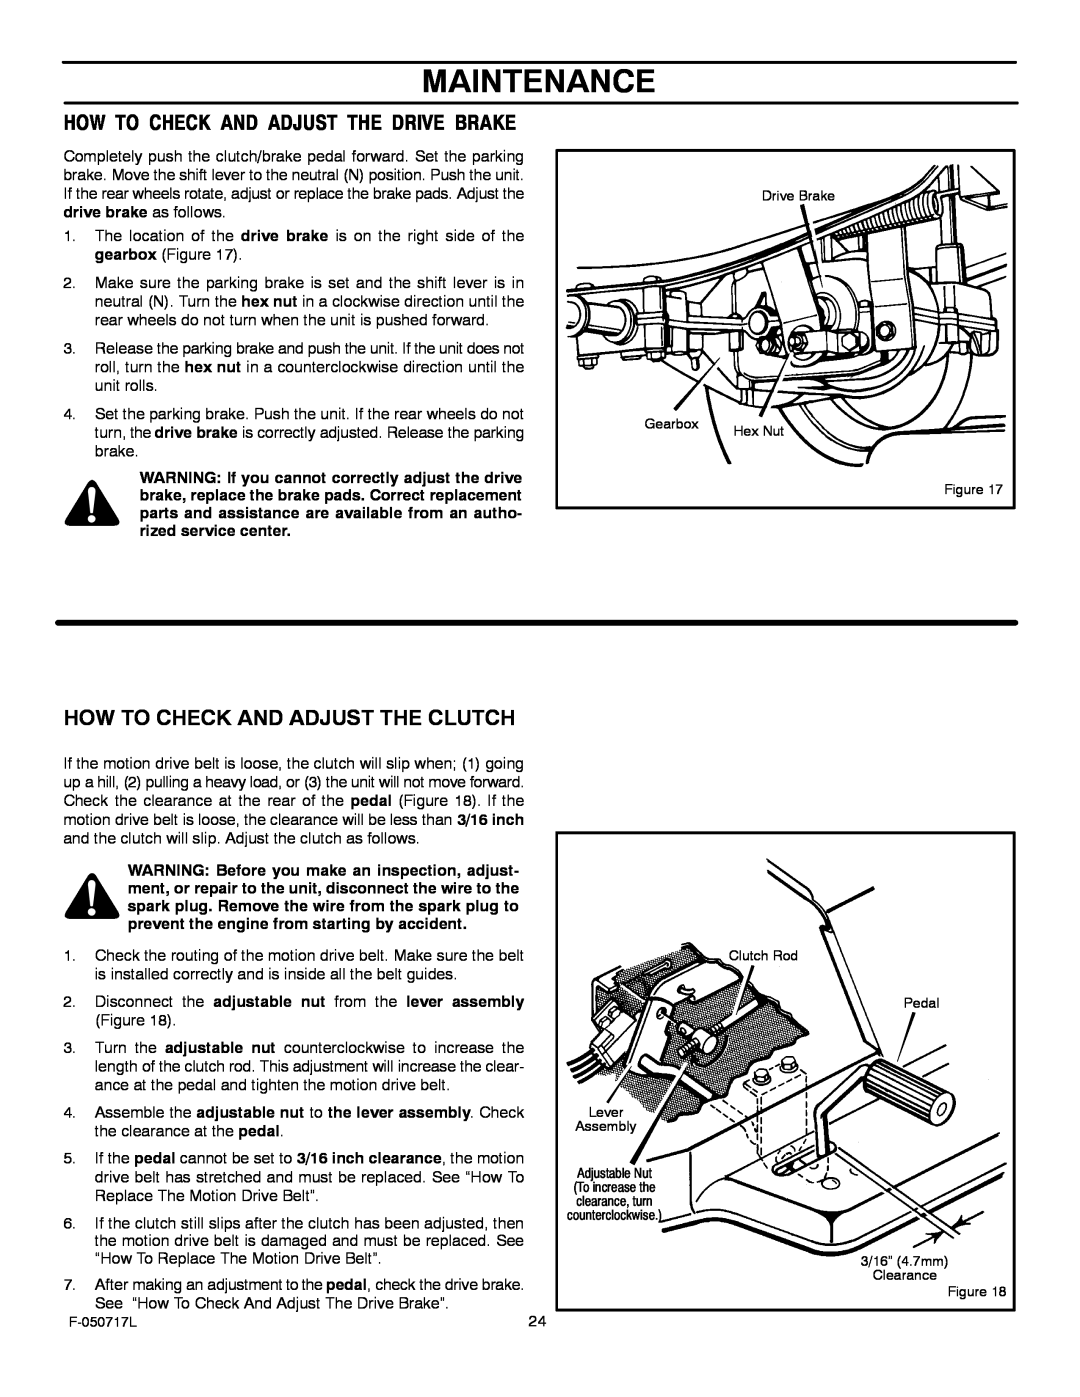 Murray 387002x92D manual Maintenance, How To Check And Adjust The Drive Brake, How To Check And Adjust The Clutch 